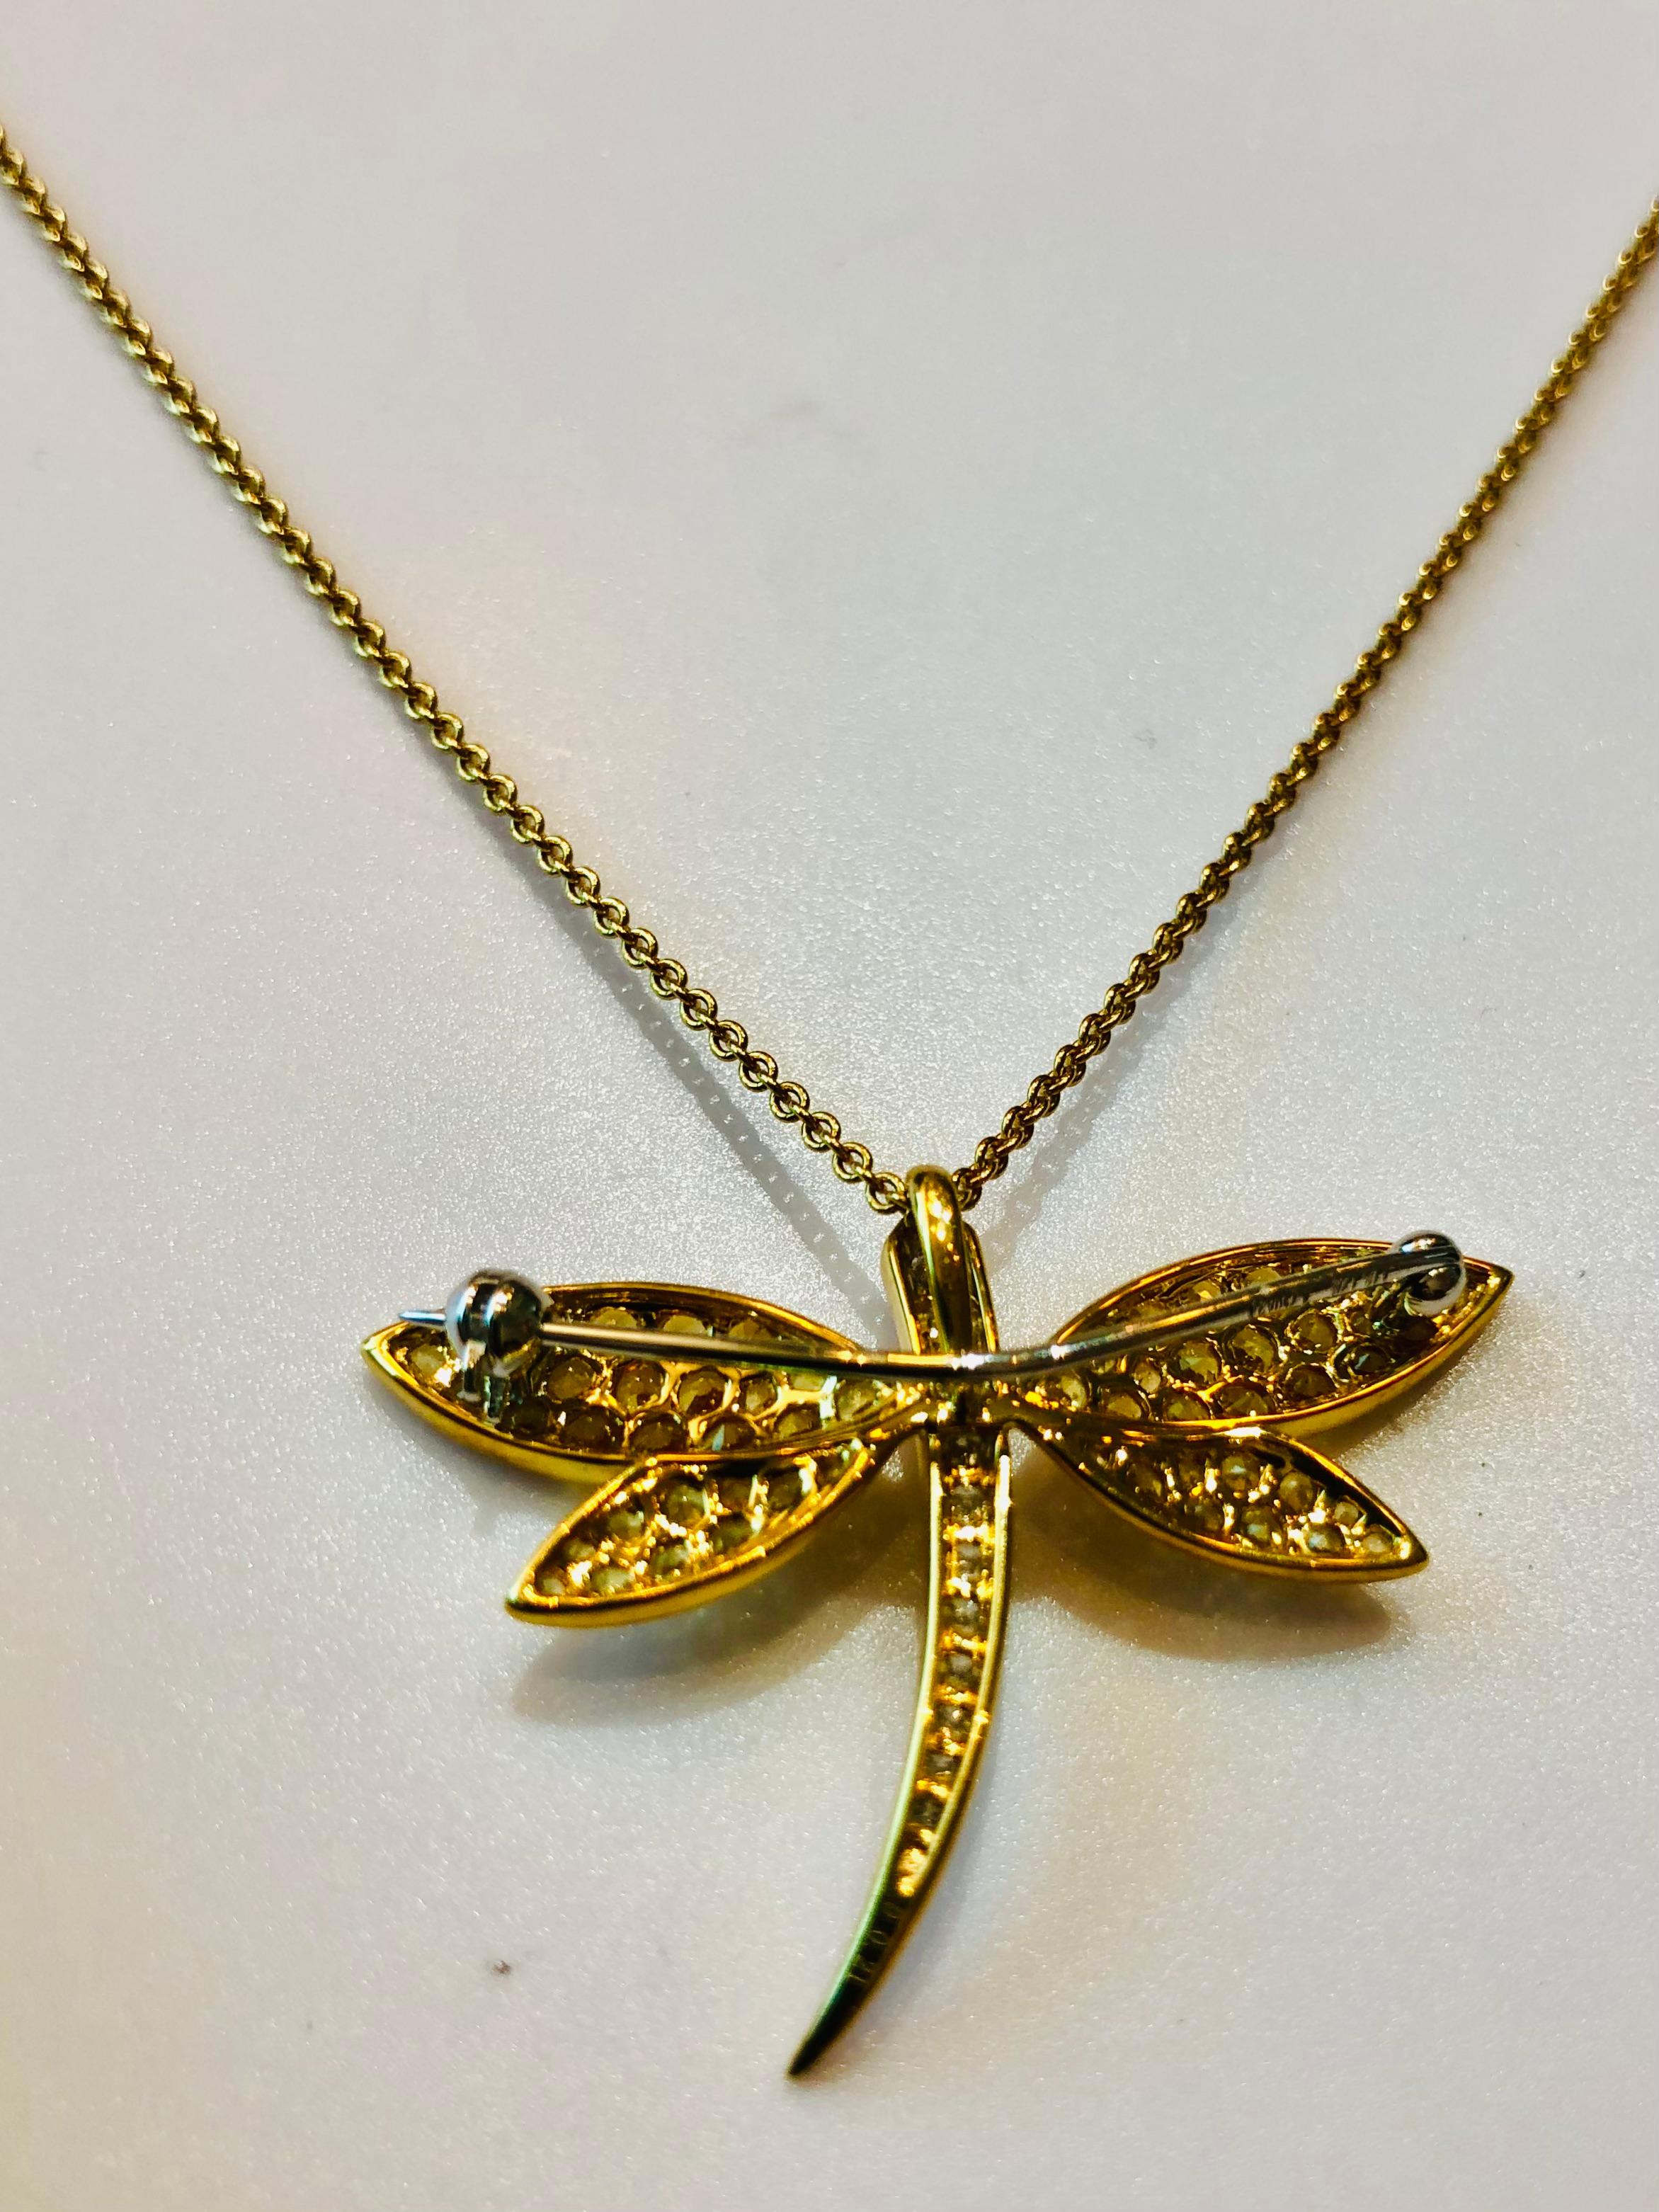 Crisscut Yellow Saphires and Diamonds Dragonfly Pendant Brooche Necklace in 18k Gold For Sale